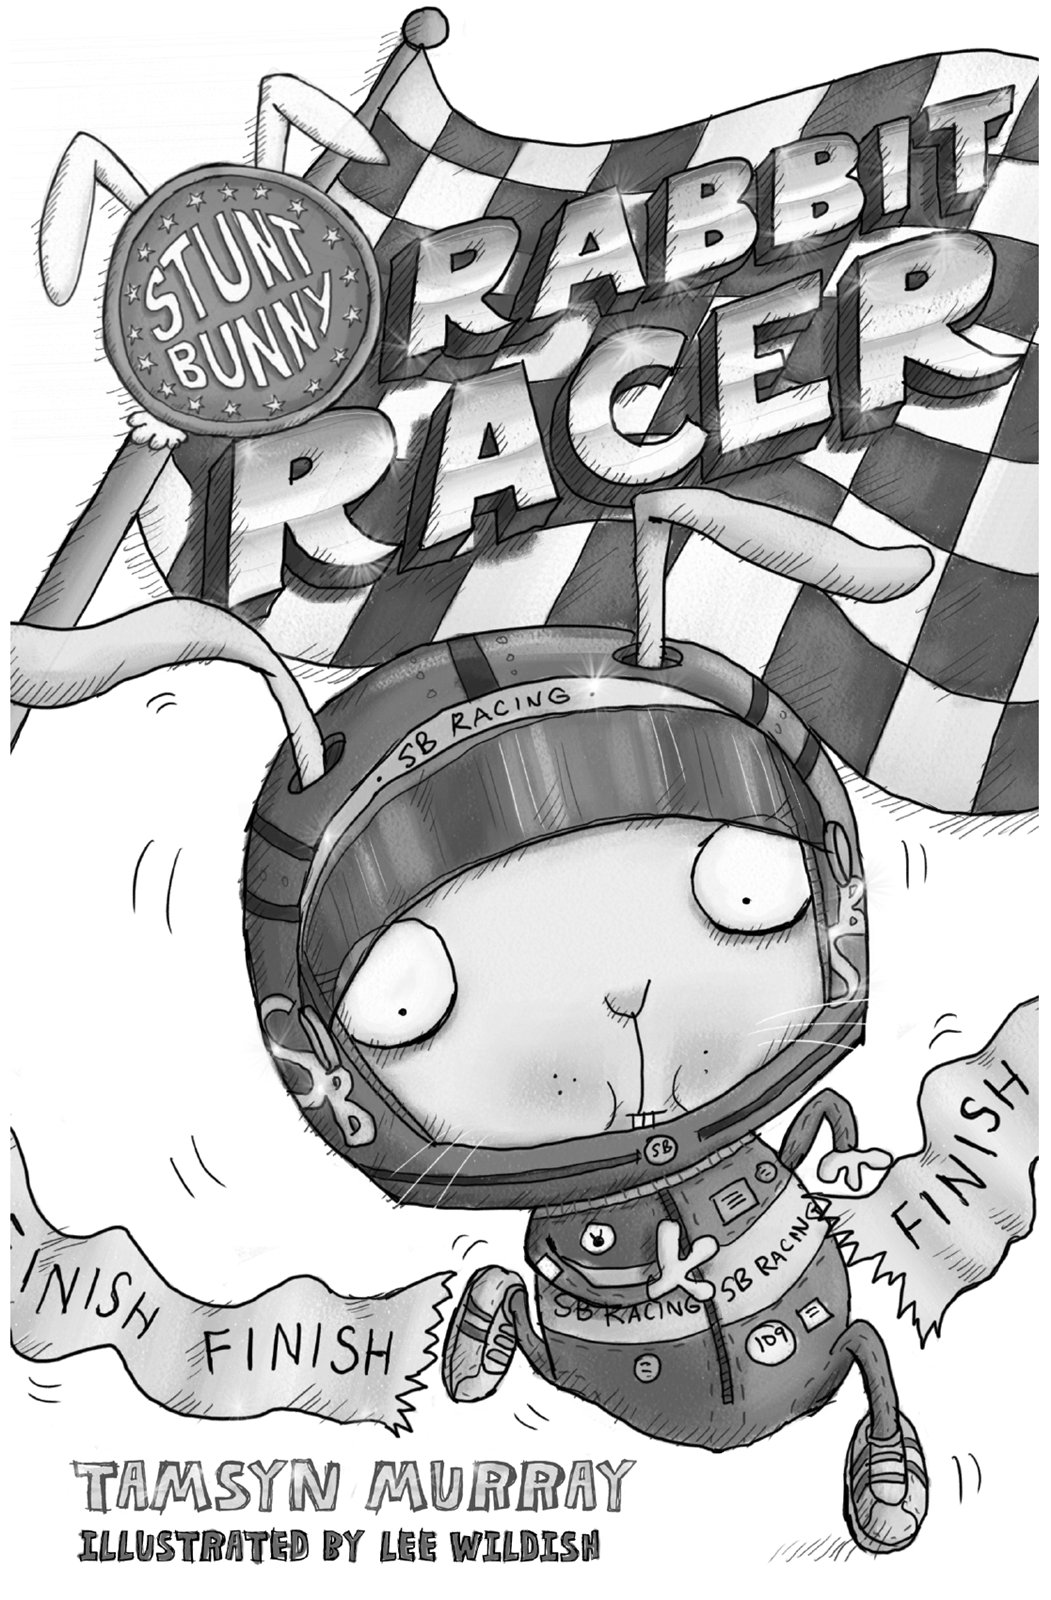 Rabbit Racer by Tamsyn Murray